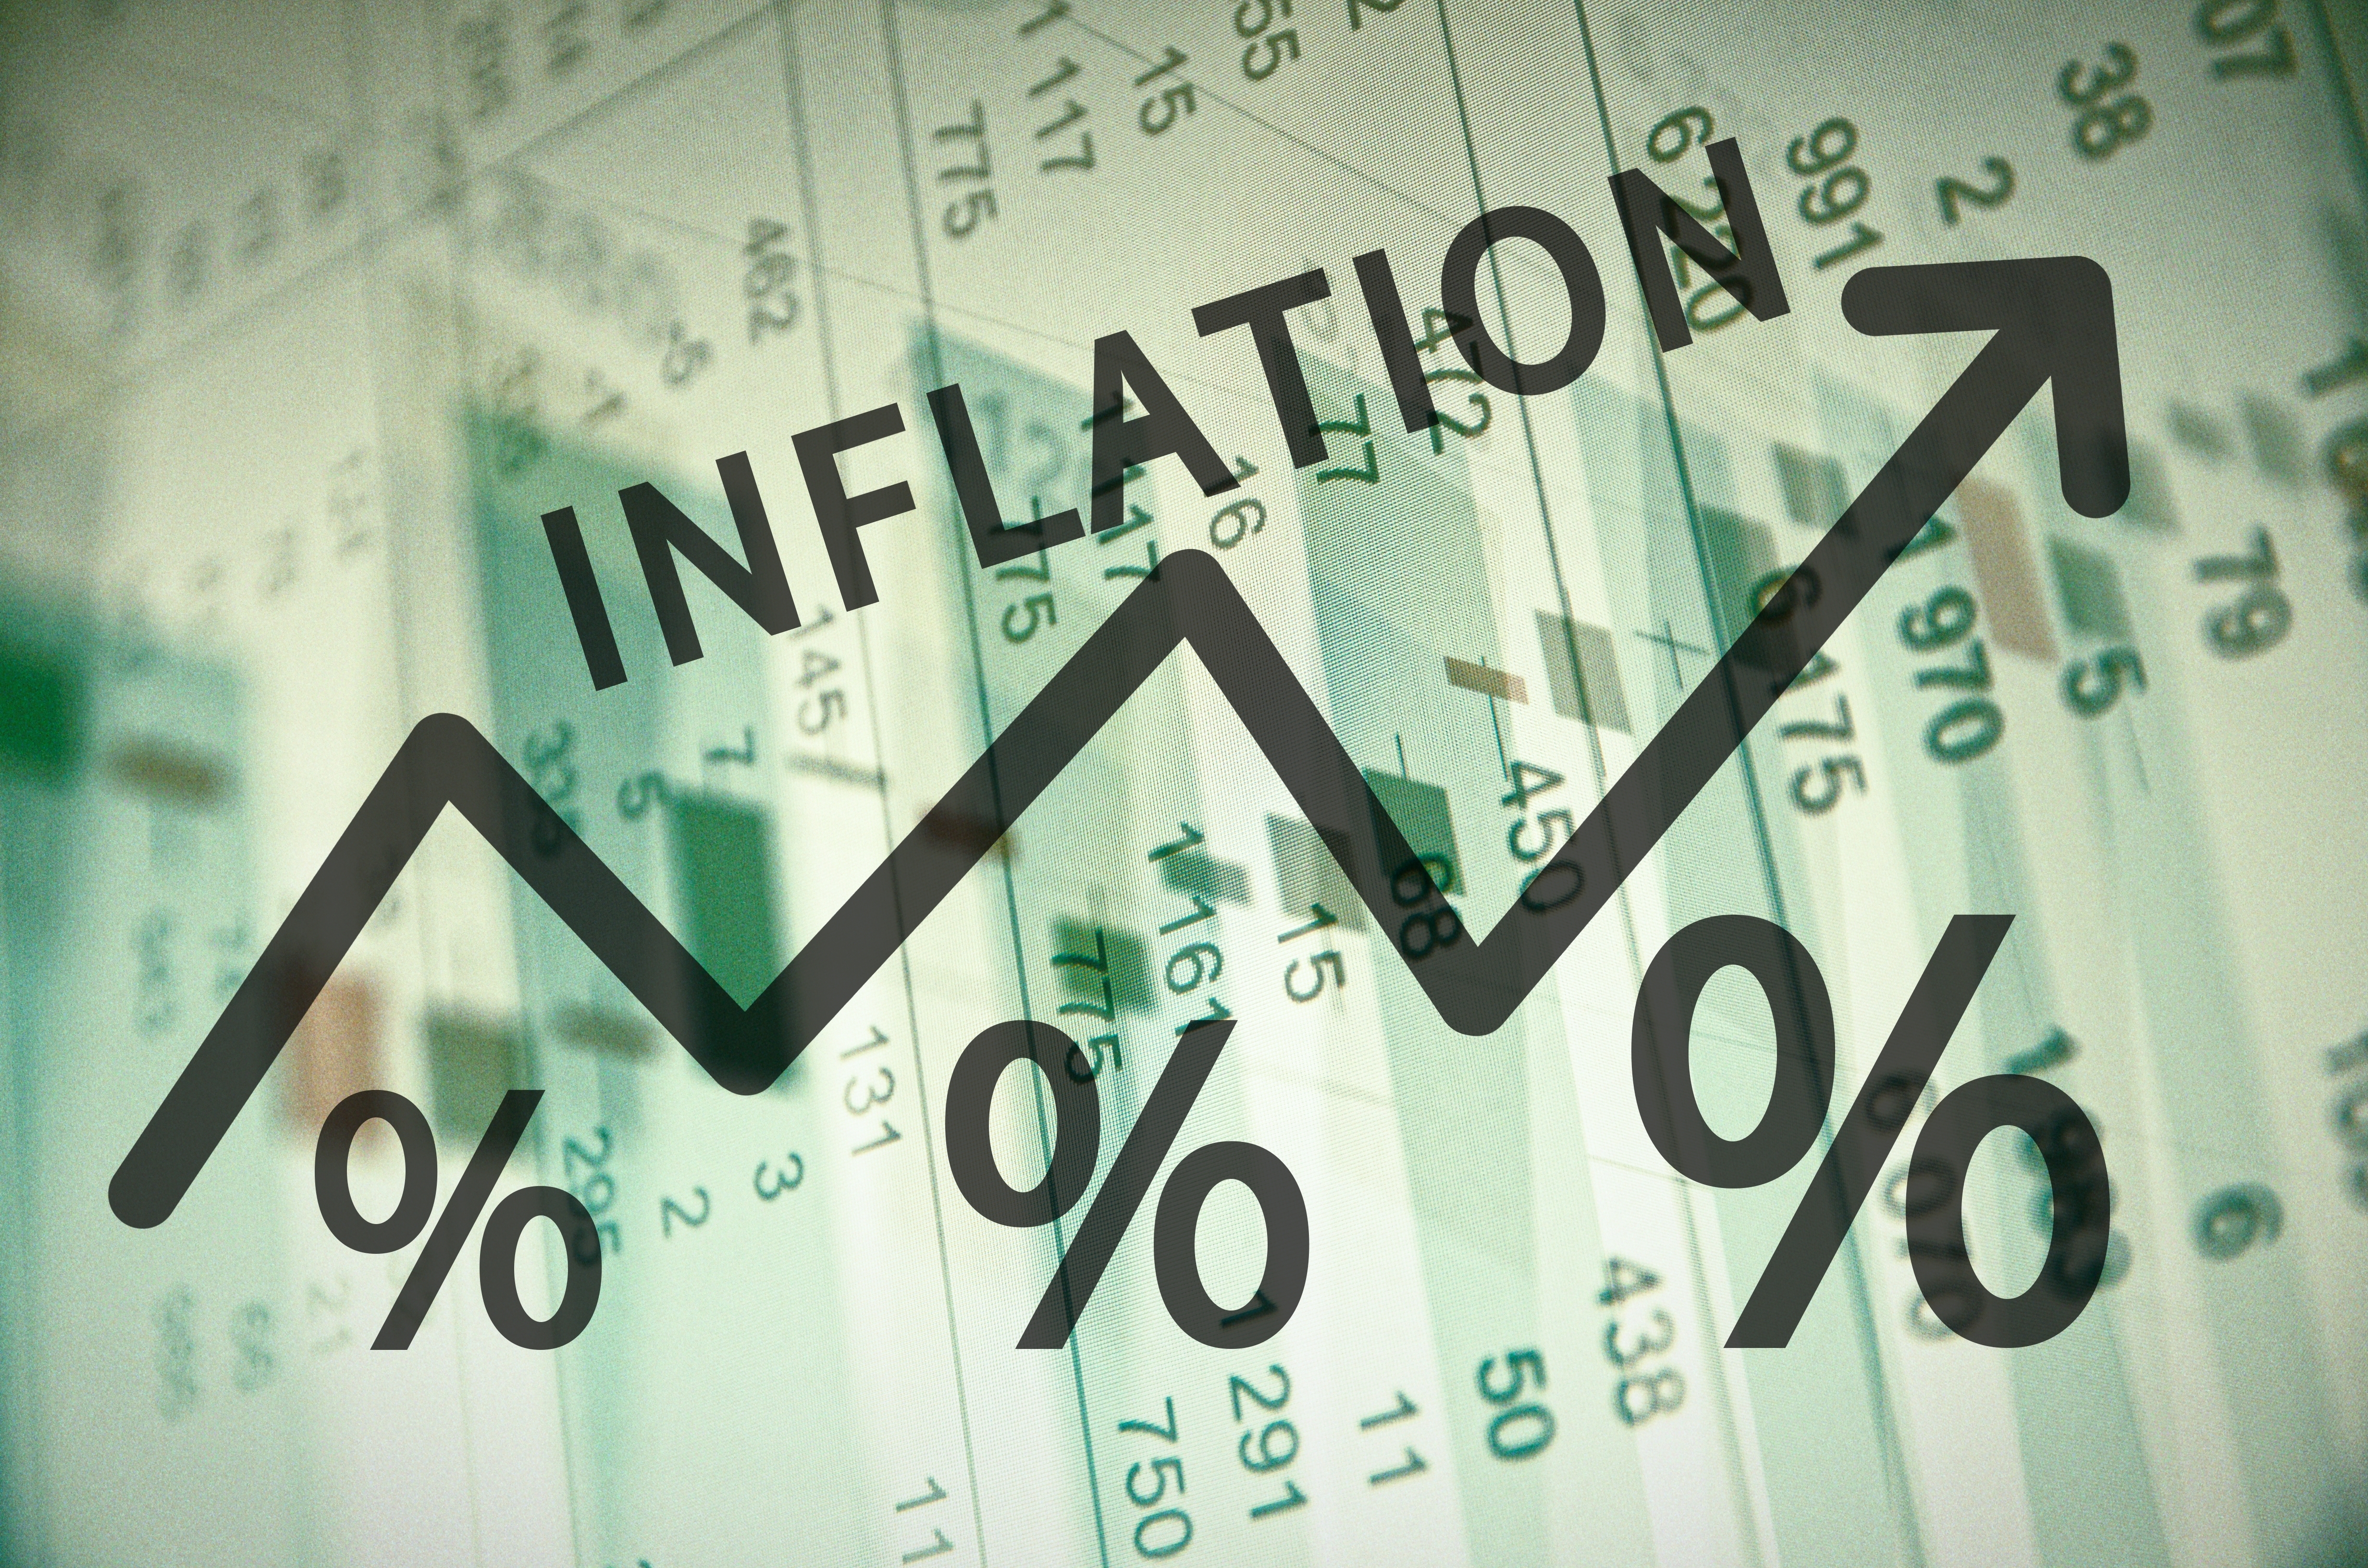 A certain amount of inflation is necessary to nurture economic growth by promoting spending rather than saving.